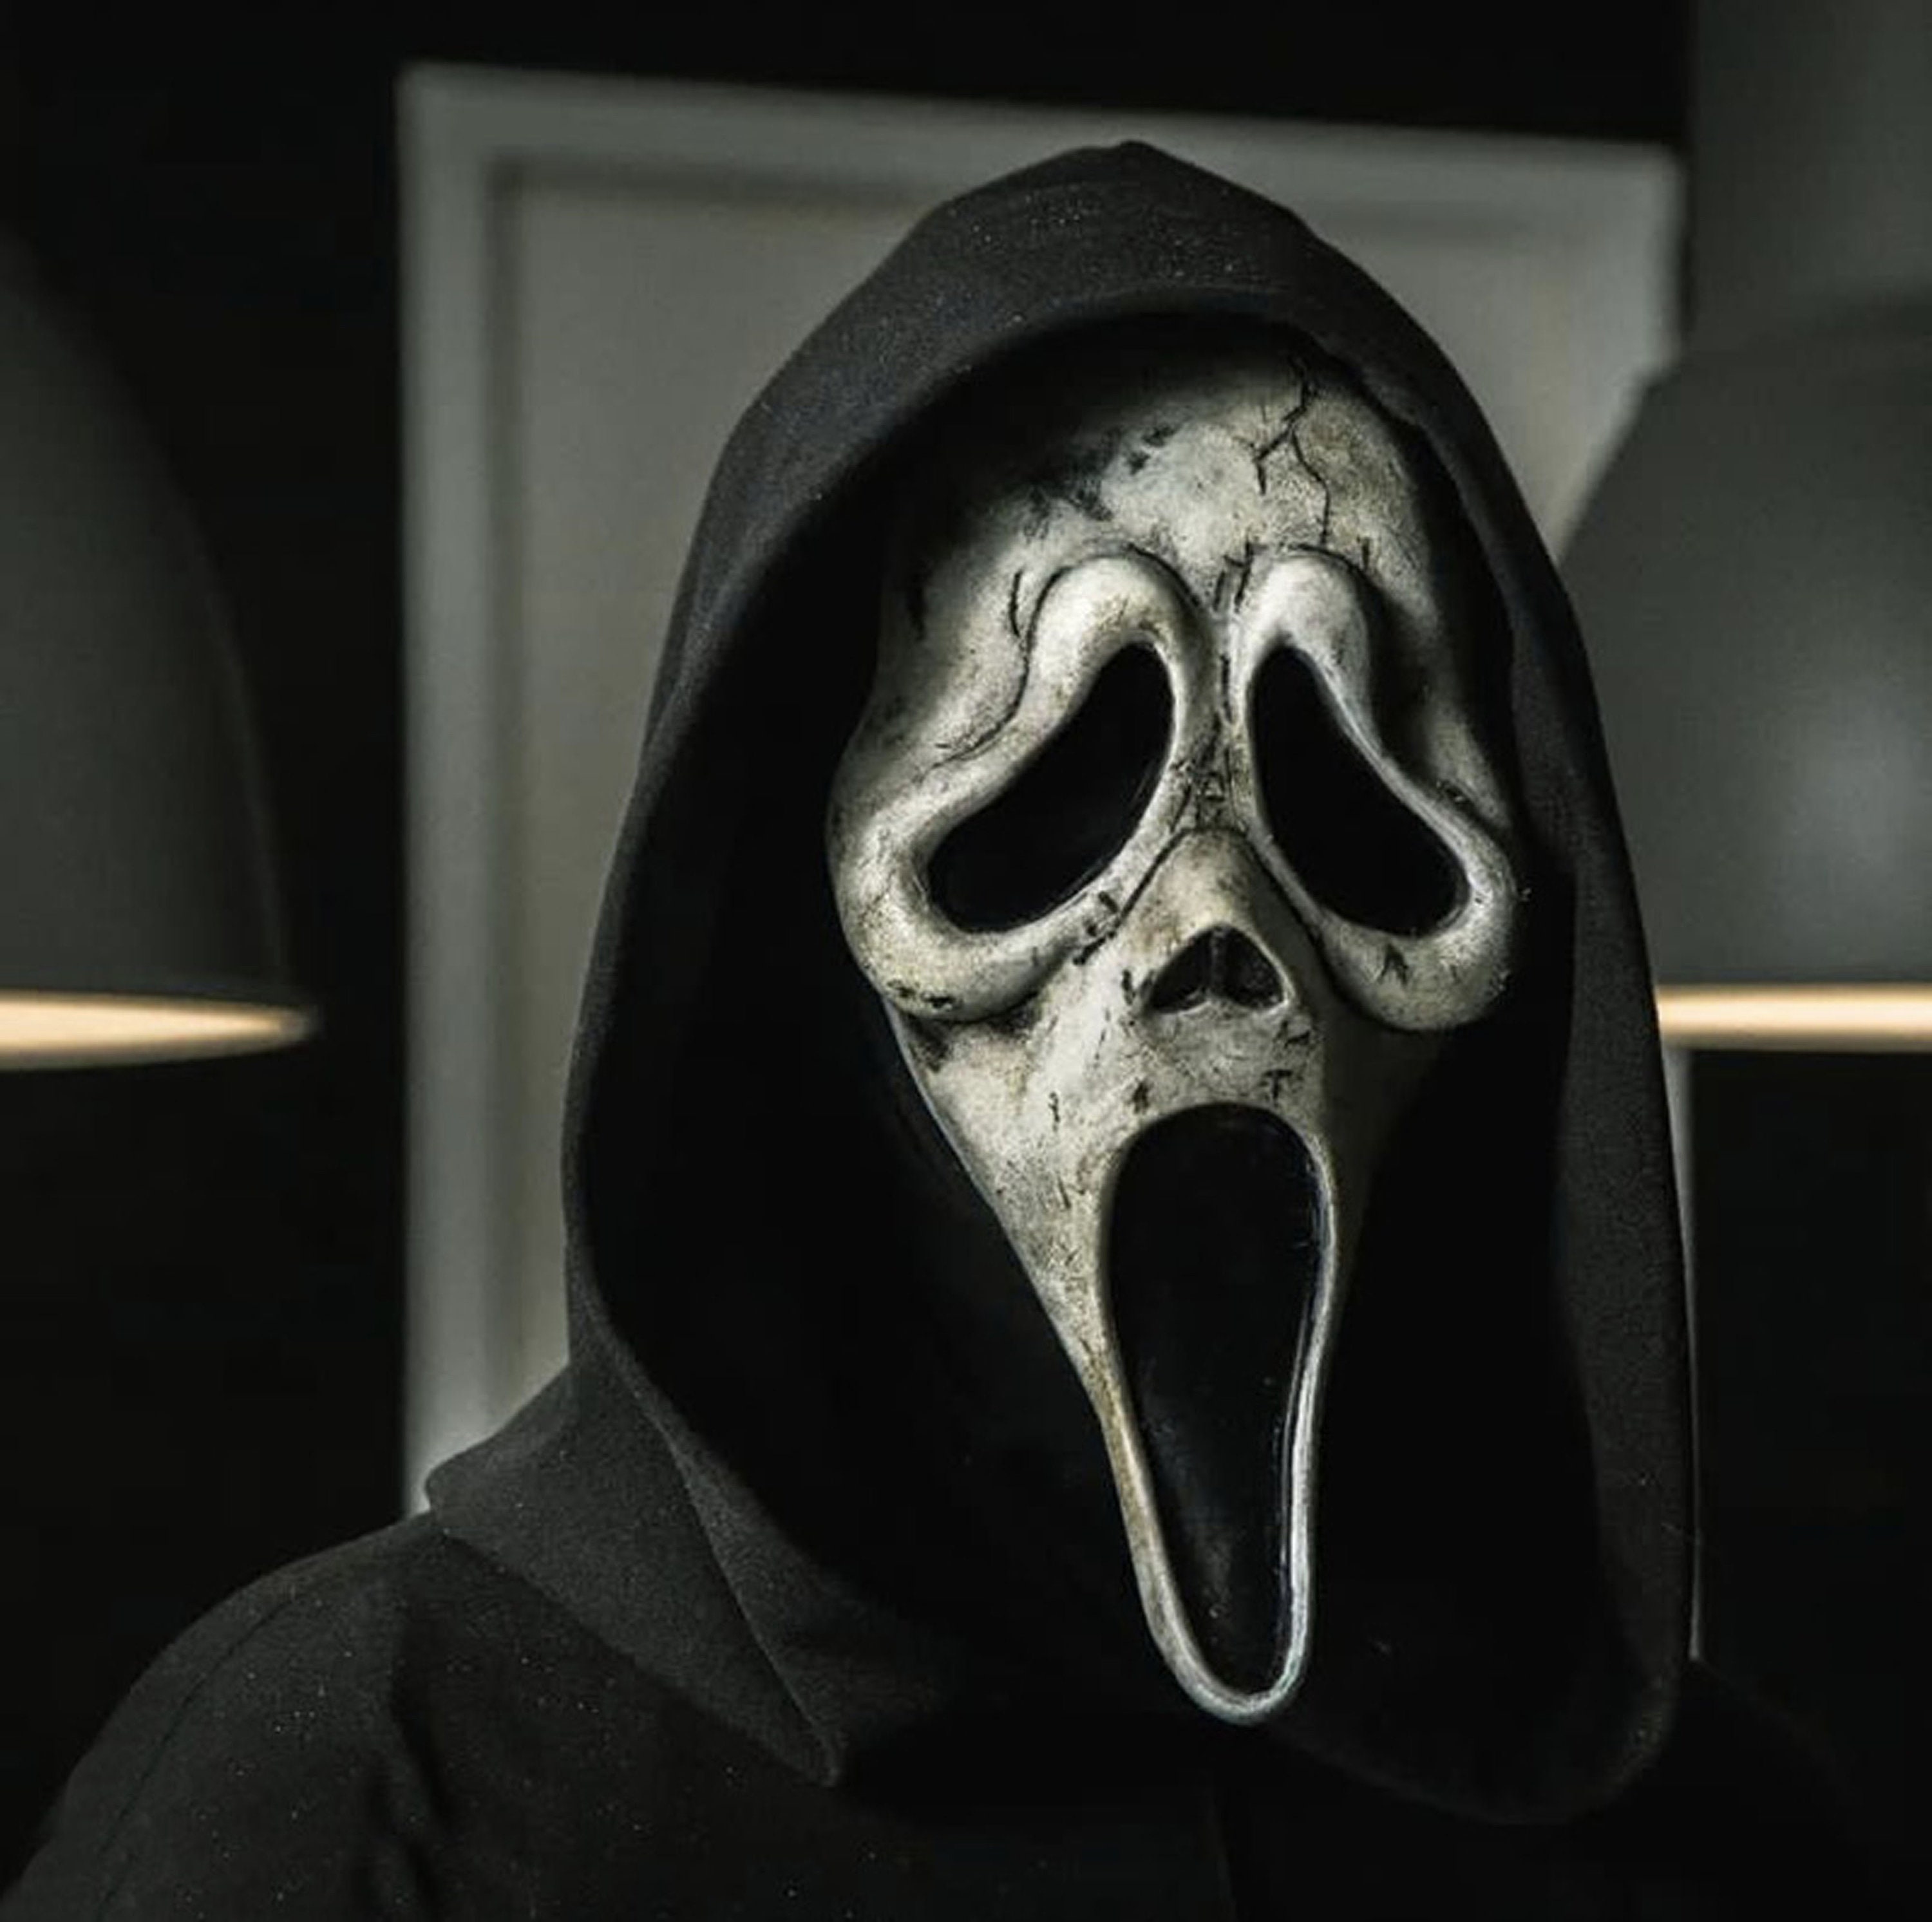 Halloween Mask Realistic Movie Scream Scary Face Creepy Ghost Mask